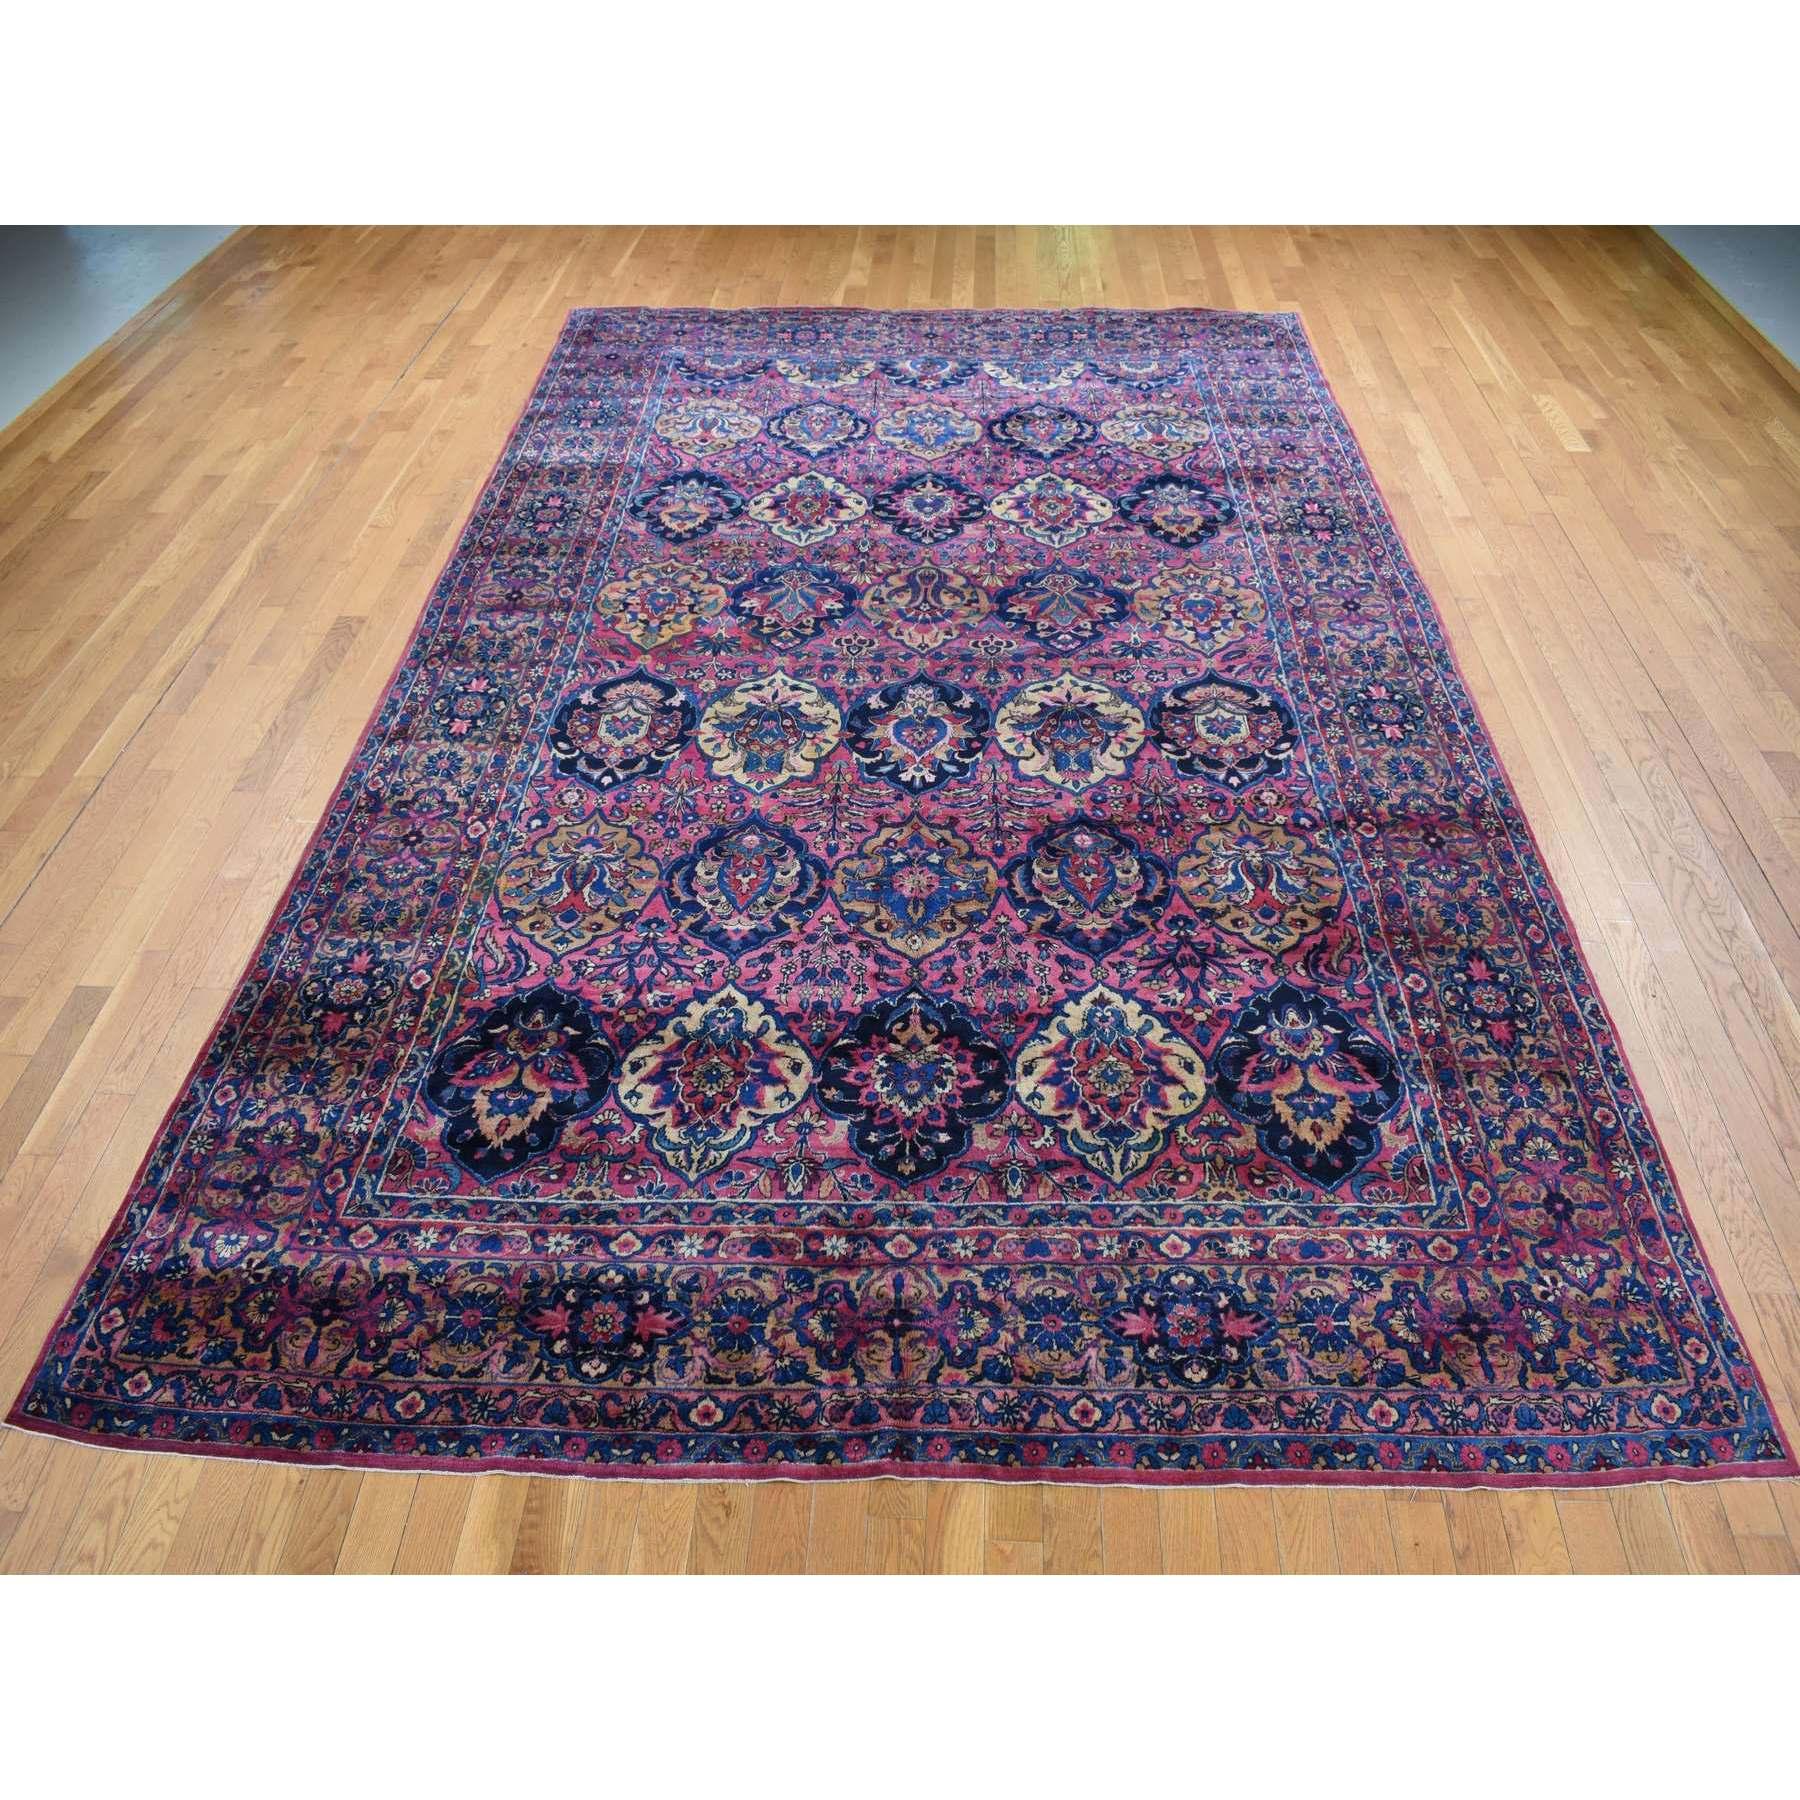 This fabulous Hand-Knotted carpet has been created and designed for extra strength and durability. This rug has been handcrafted for weeks in the traditional method that is used to make
Exact Rug Size in Feet and Inches : 8'10